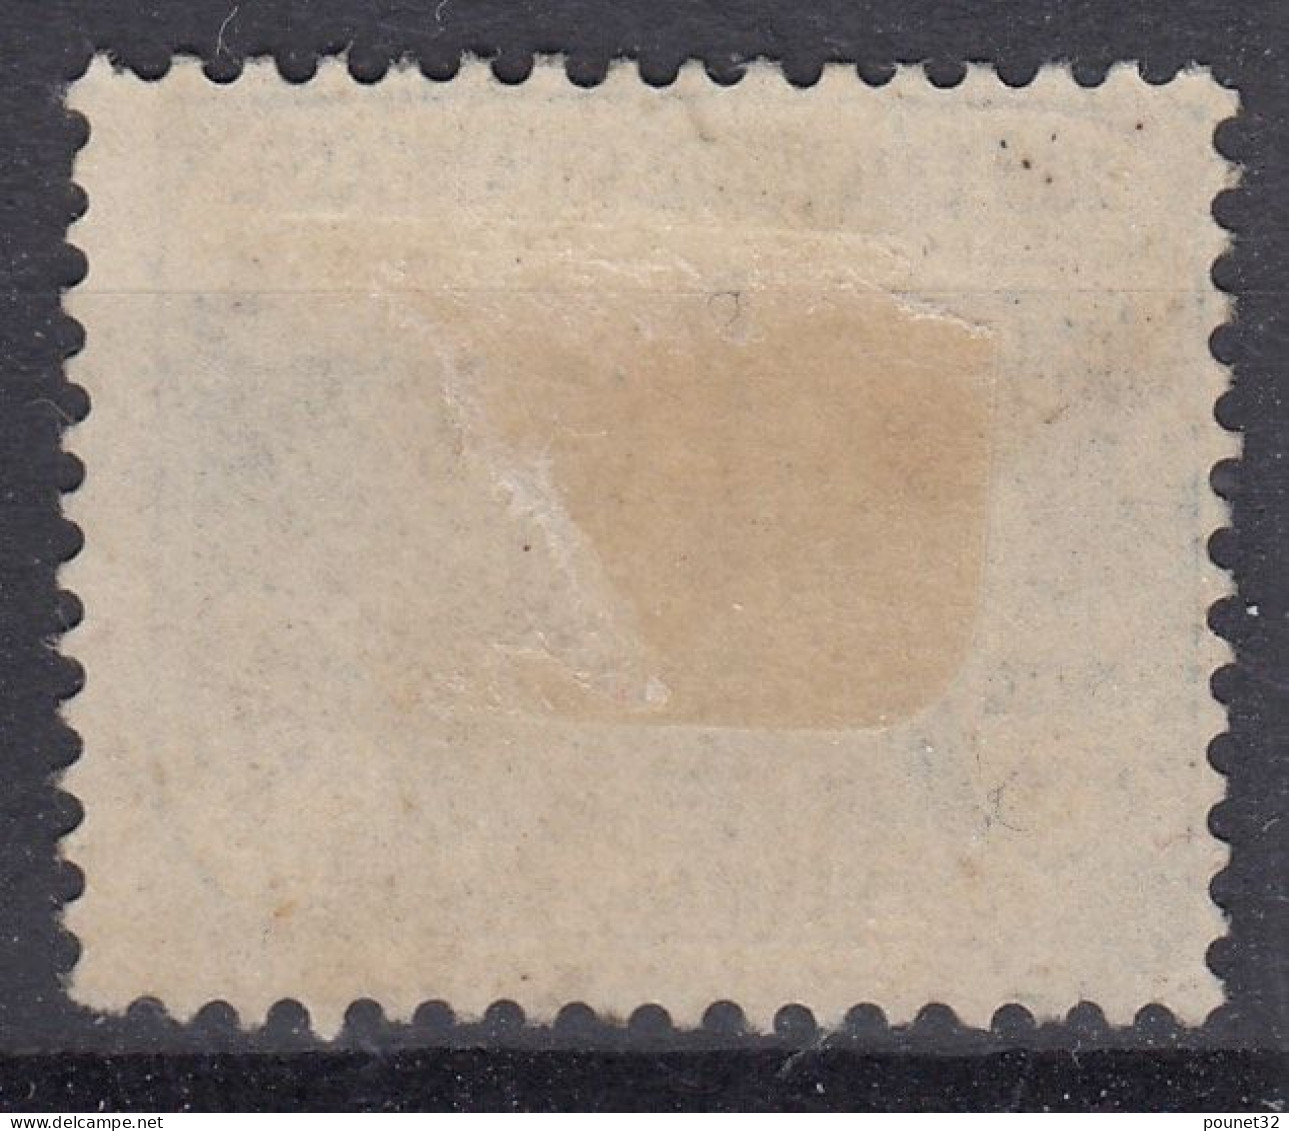 TIMBRE FRANCE 1ère ORPHELIN N° 151 OBLITERATION TRES LEGERE - COTE 65 € - Usados